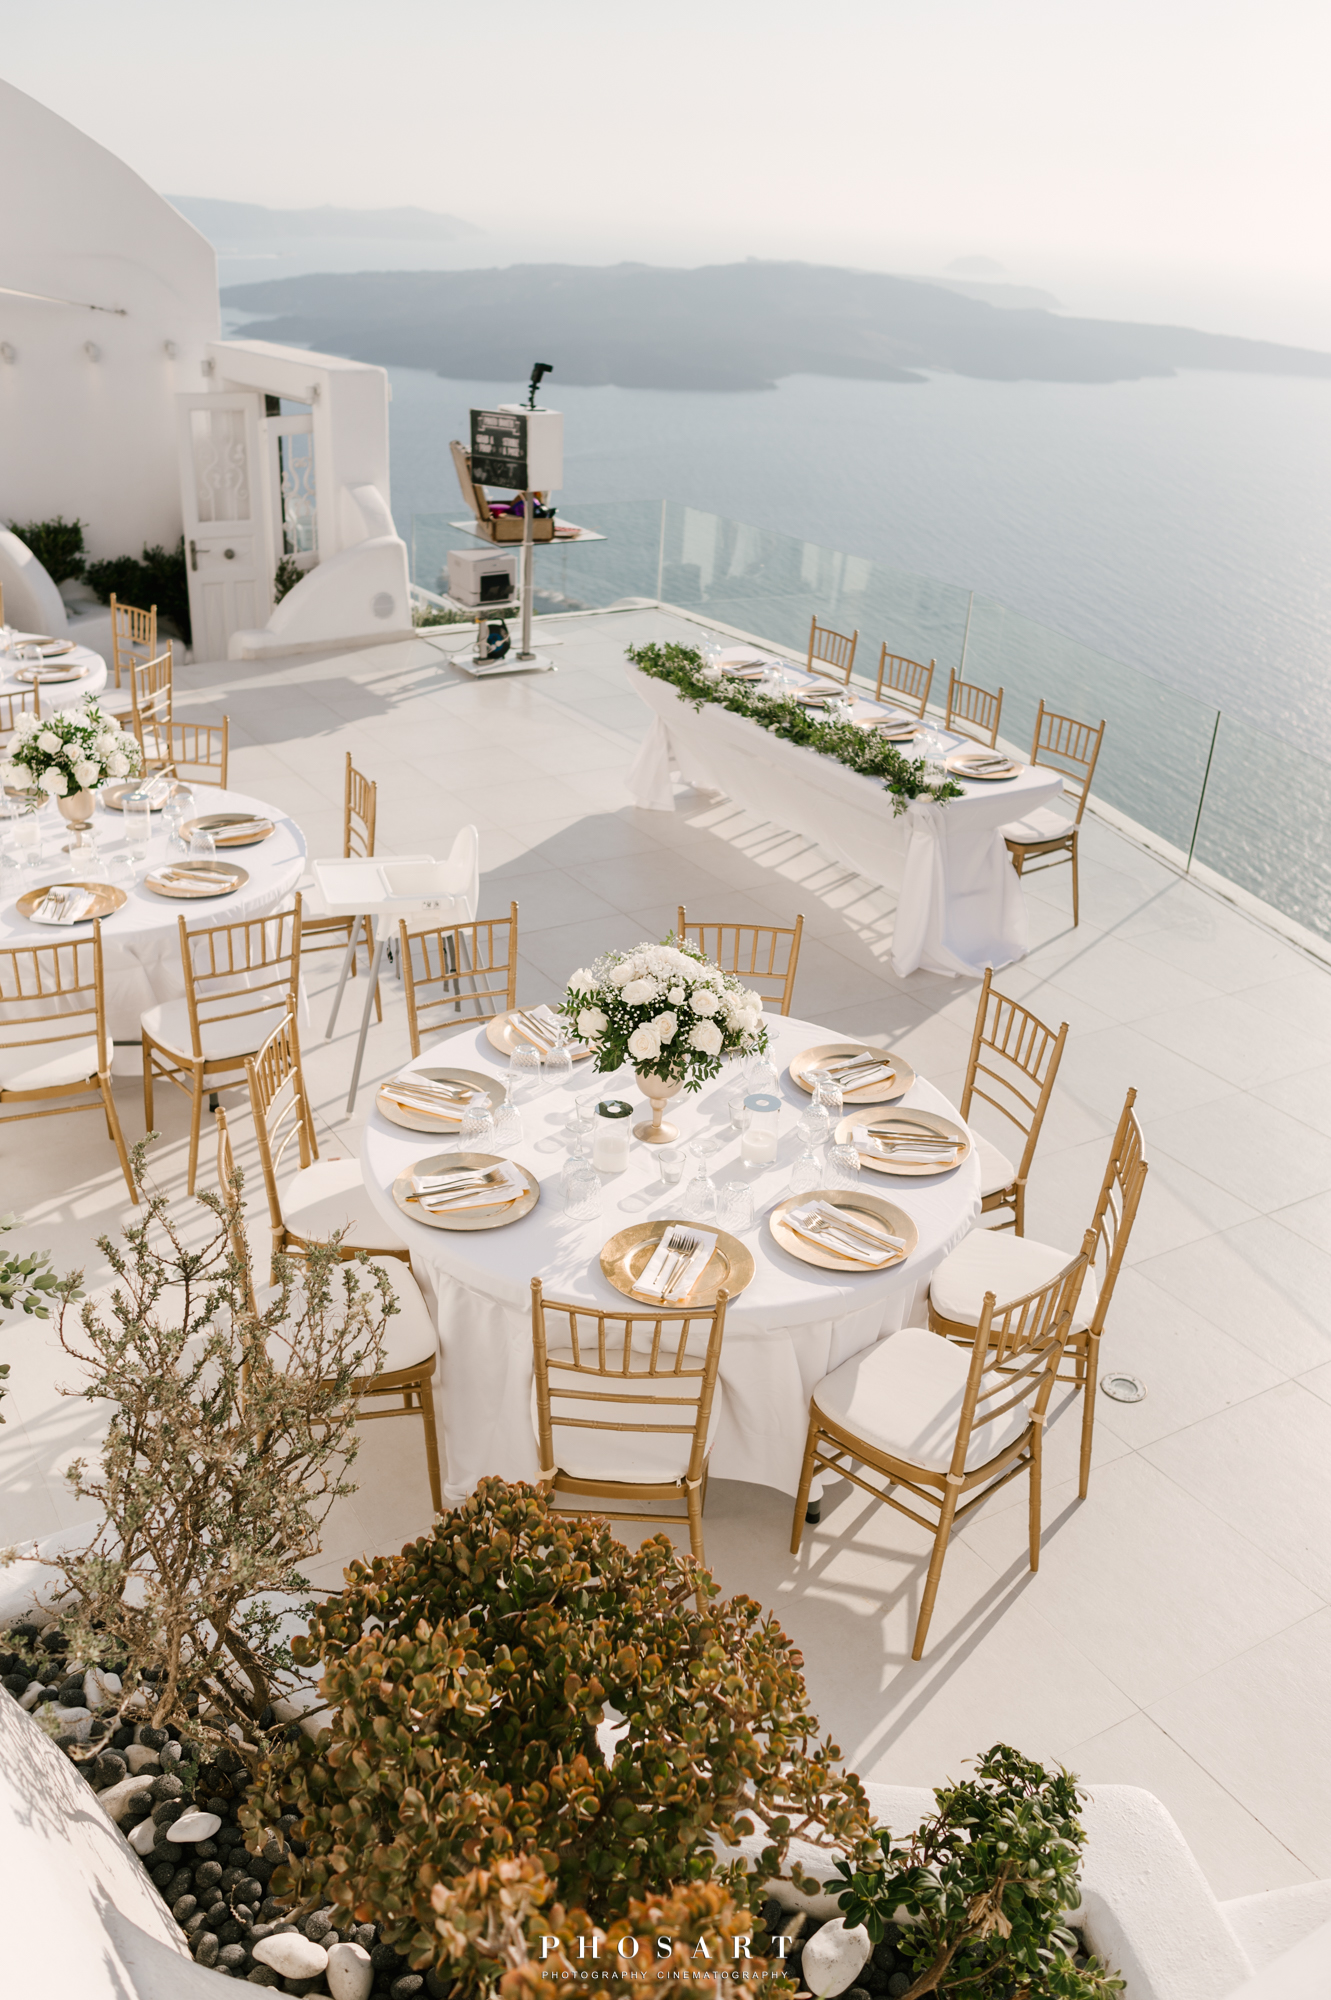 The terrace of Dana Villas & Infinity Suites decorated for a wedding event overlooking the Aegean Sea